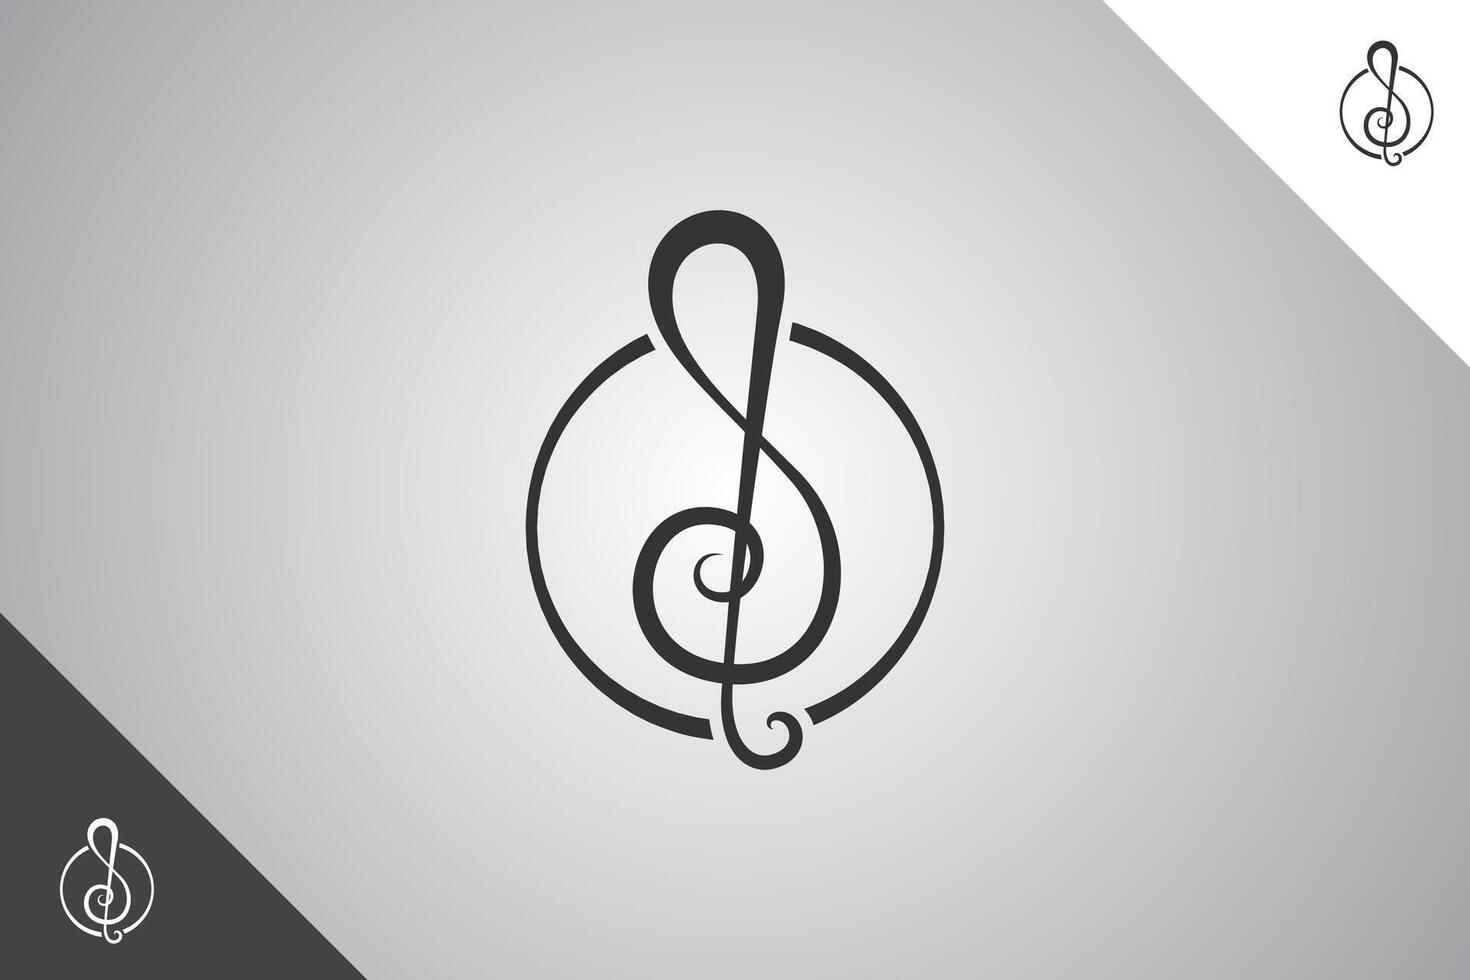 Music notes logo. Minimal and modern logotype. Perfect logo for business related to band, musicians and singers industry. Isolated background. Vector eps 10.